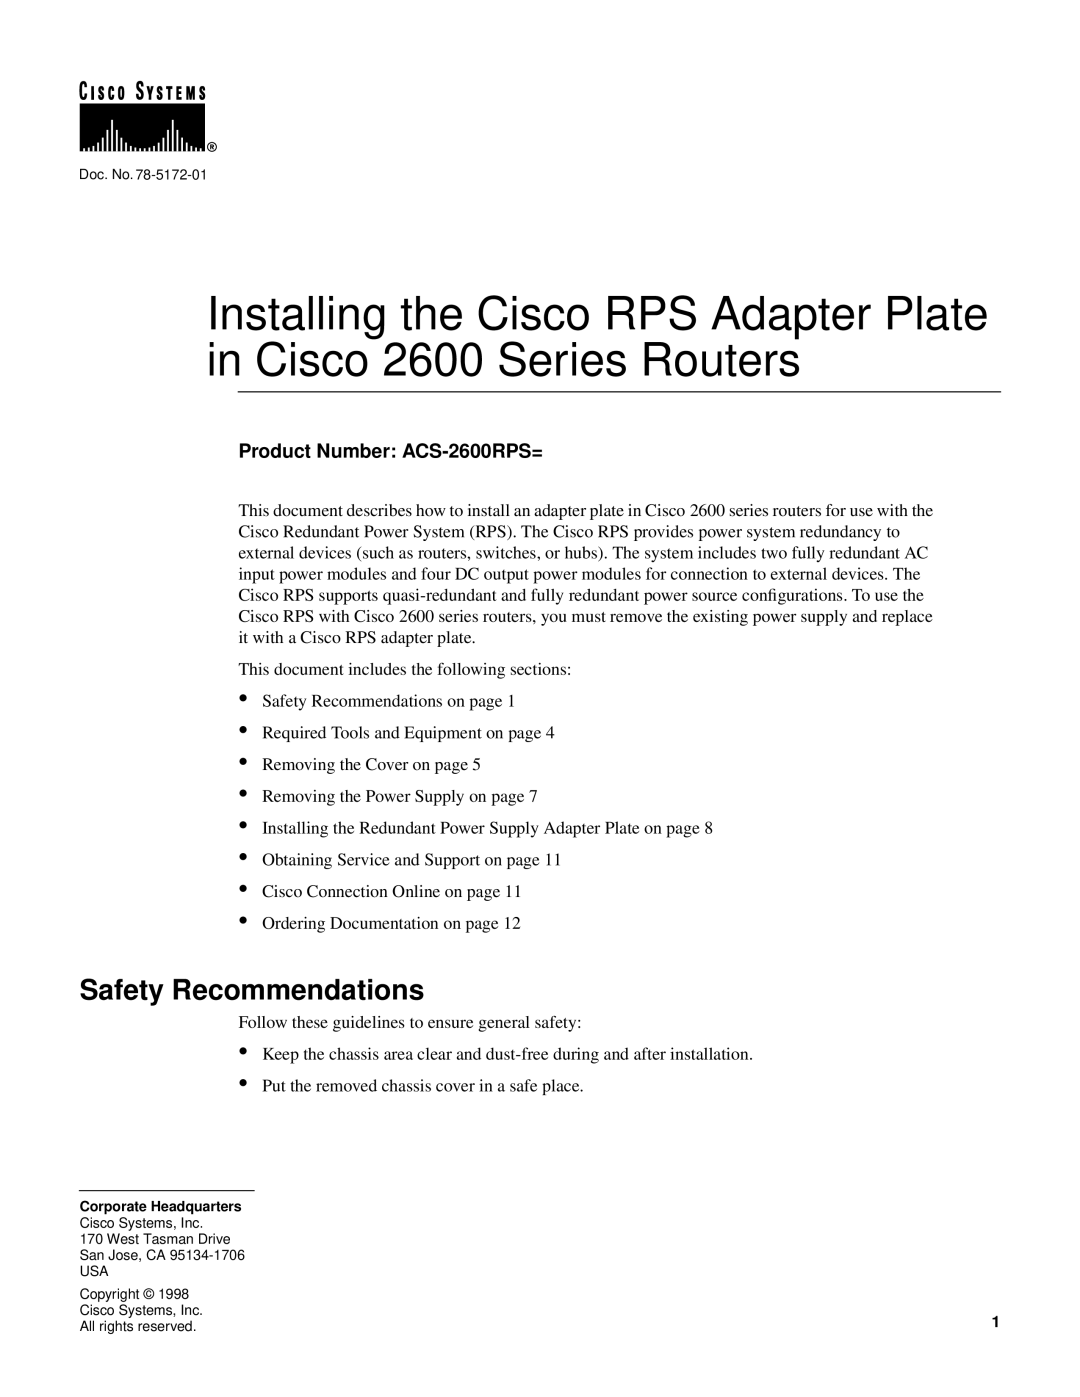 Cisco Systems 2600 Series manual Safety Recommendations, Product Number ACS-2600RPS= 